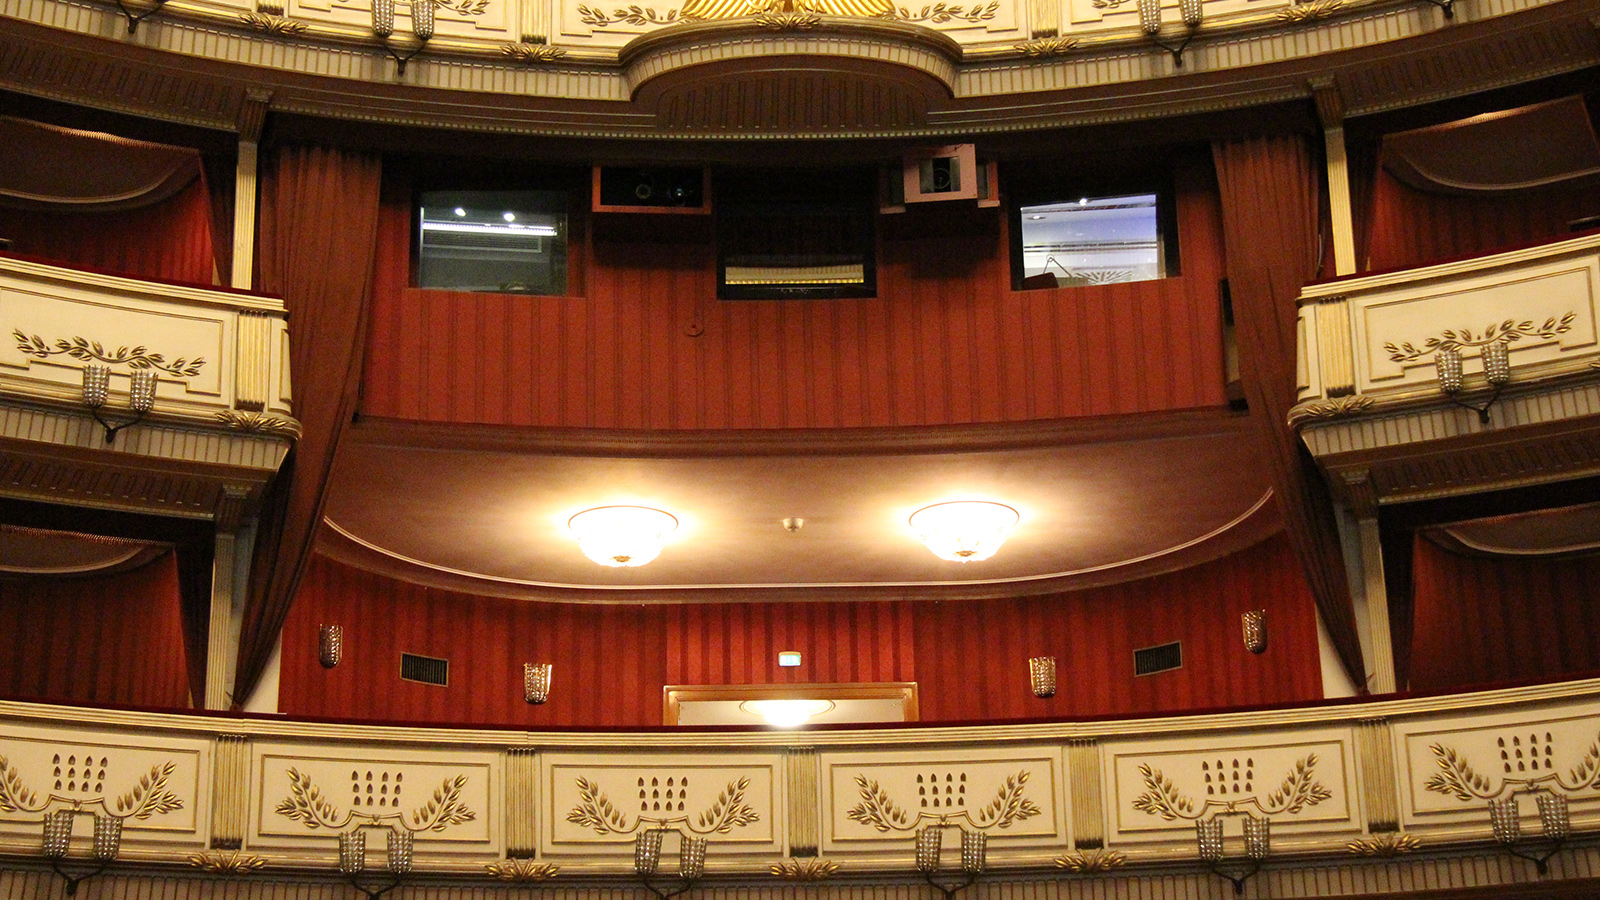 To this day, the central box on the first level of the auditorium is called the Kaiserloge, or Emperor’s Box, as it was reserved for the emperor and the court. The emperor was also able to retire to the tea salon behind it, which has been preserved in its original state. The sound control room is located behind the windows above the box. 